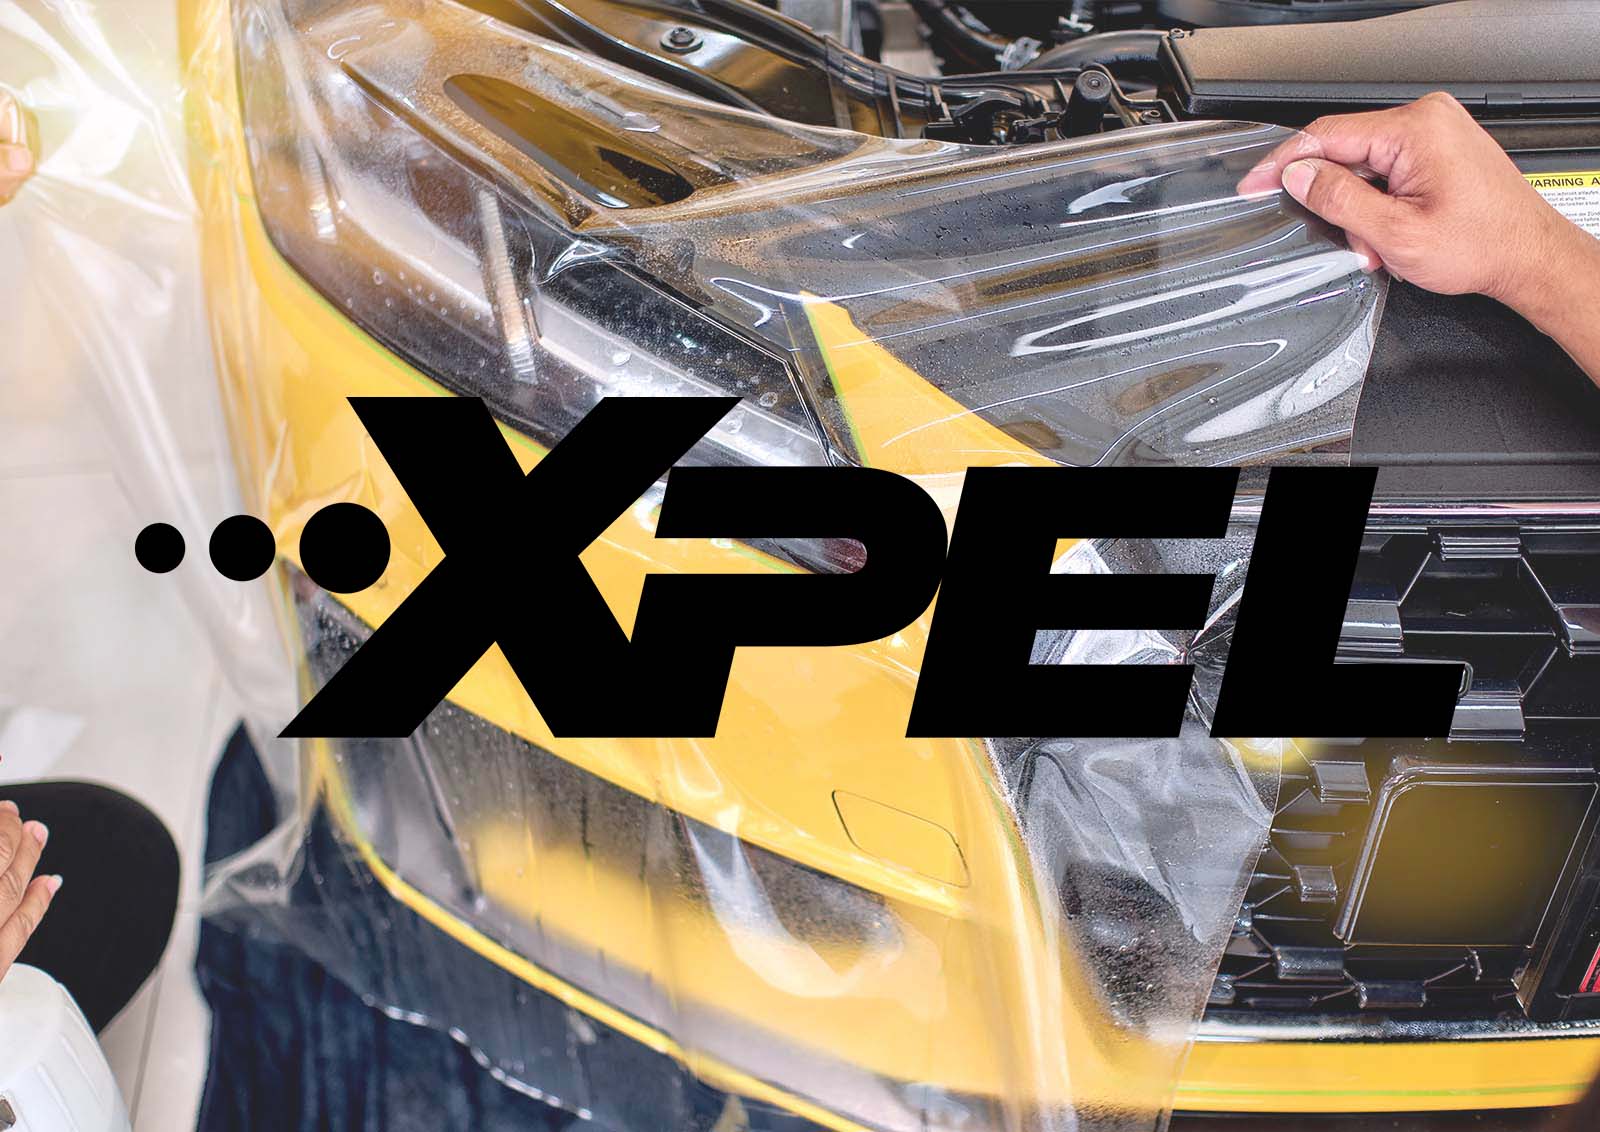 XPEL Paint Protection Film for Vehicles